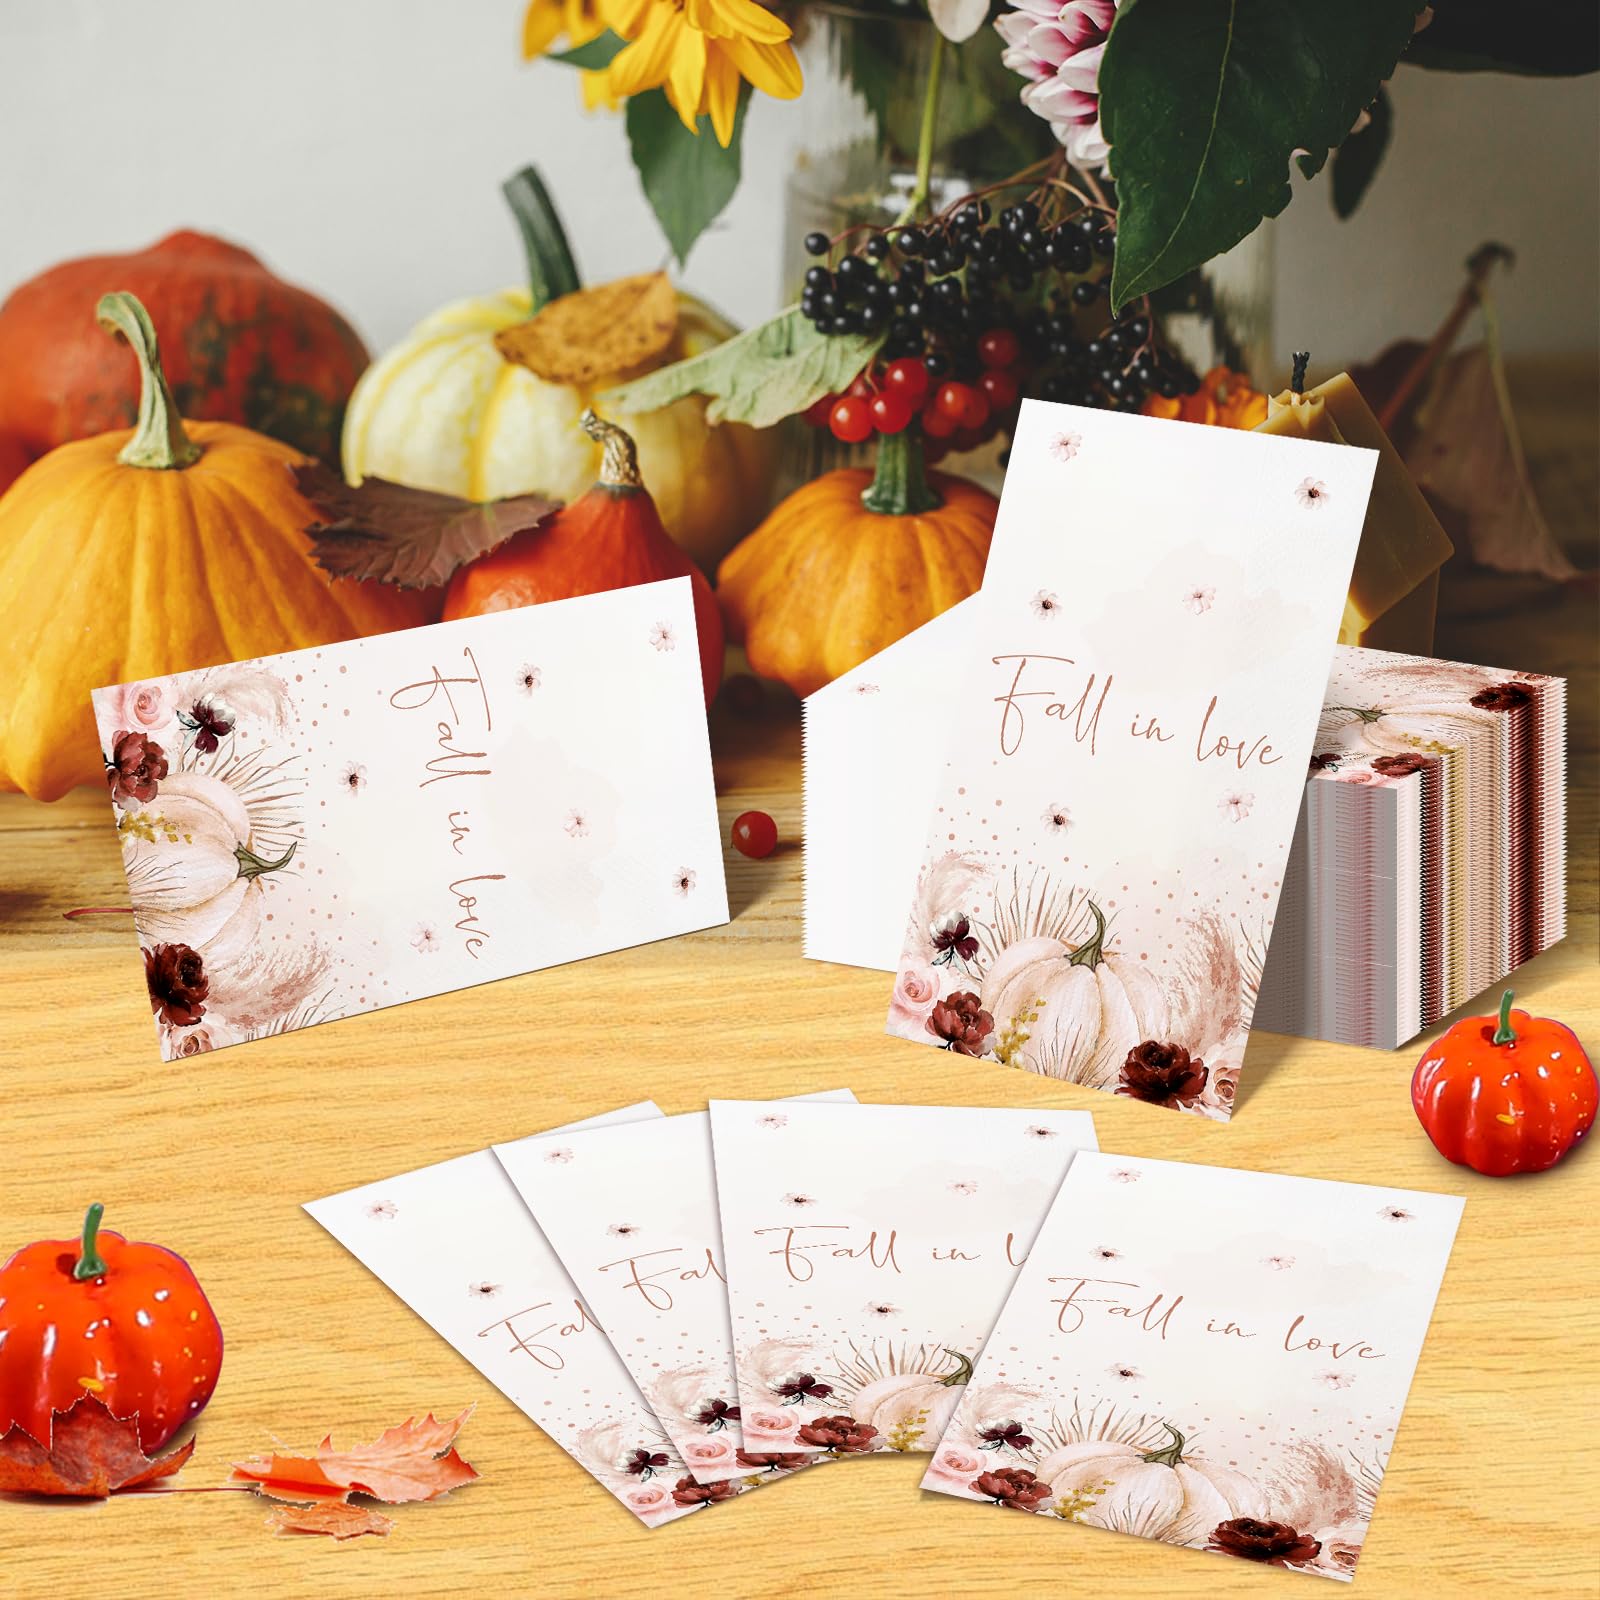 100Pcs Fall In Love Paper Napkins, Decorative Wedding Napkin Disposable Paper Hand Towels With Pumpkin Floral for Fall Wedding Bridal Showers Engagements Party Decorations,7.9 * 4.3 Inch